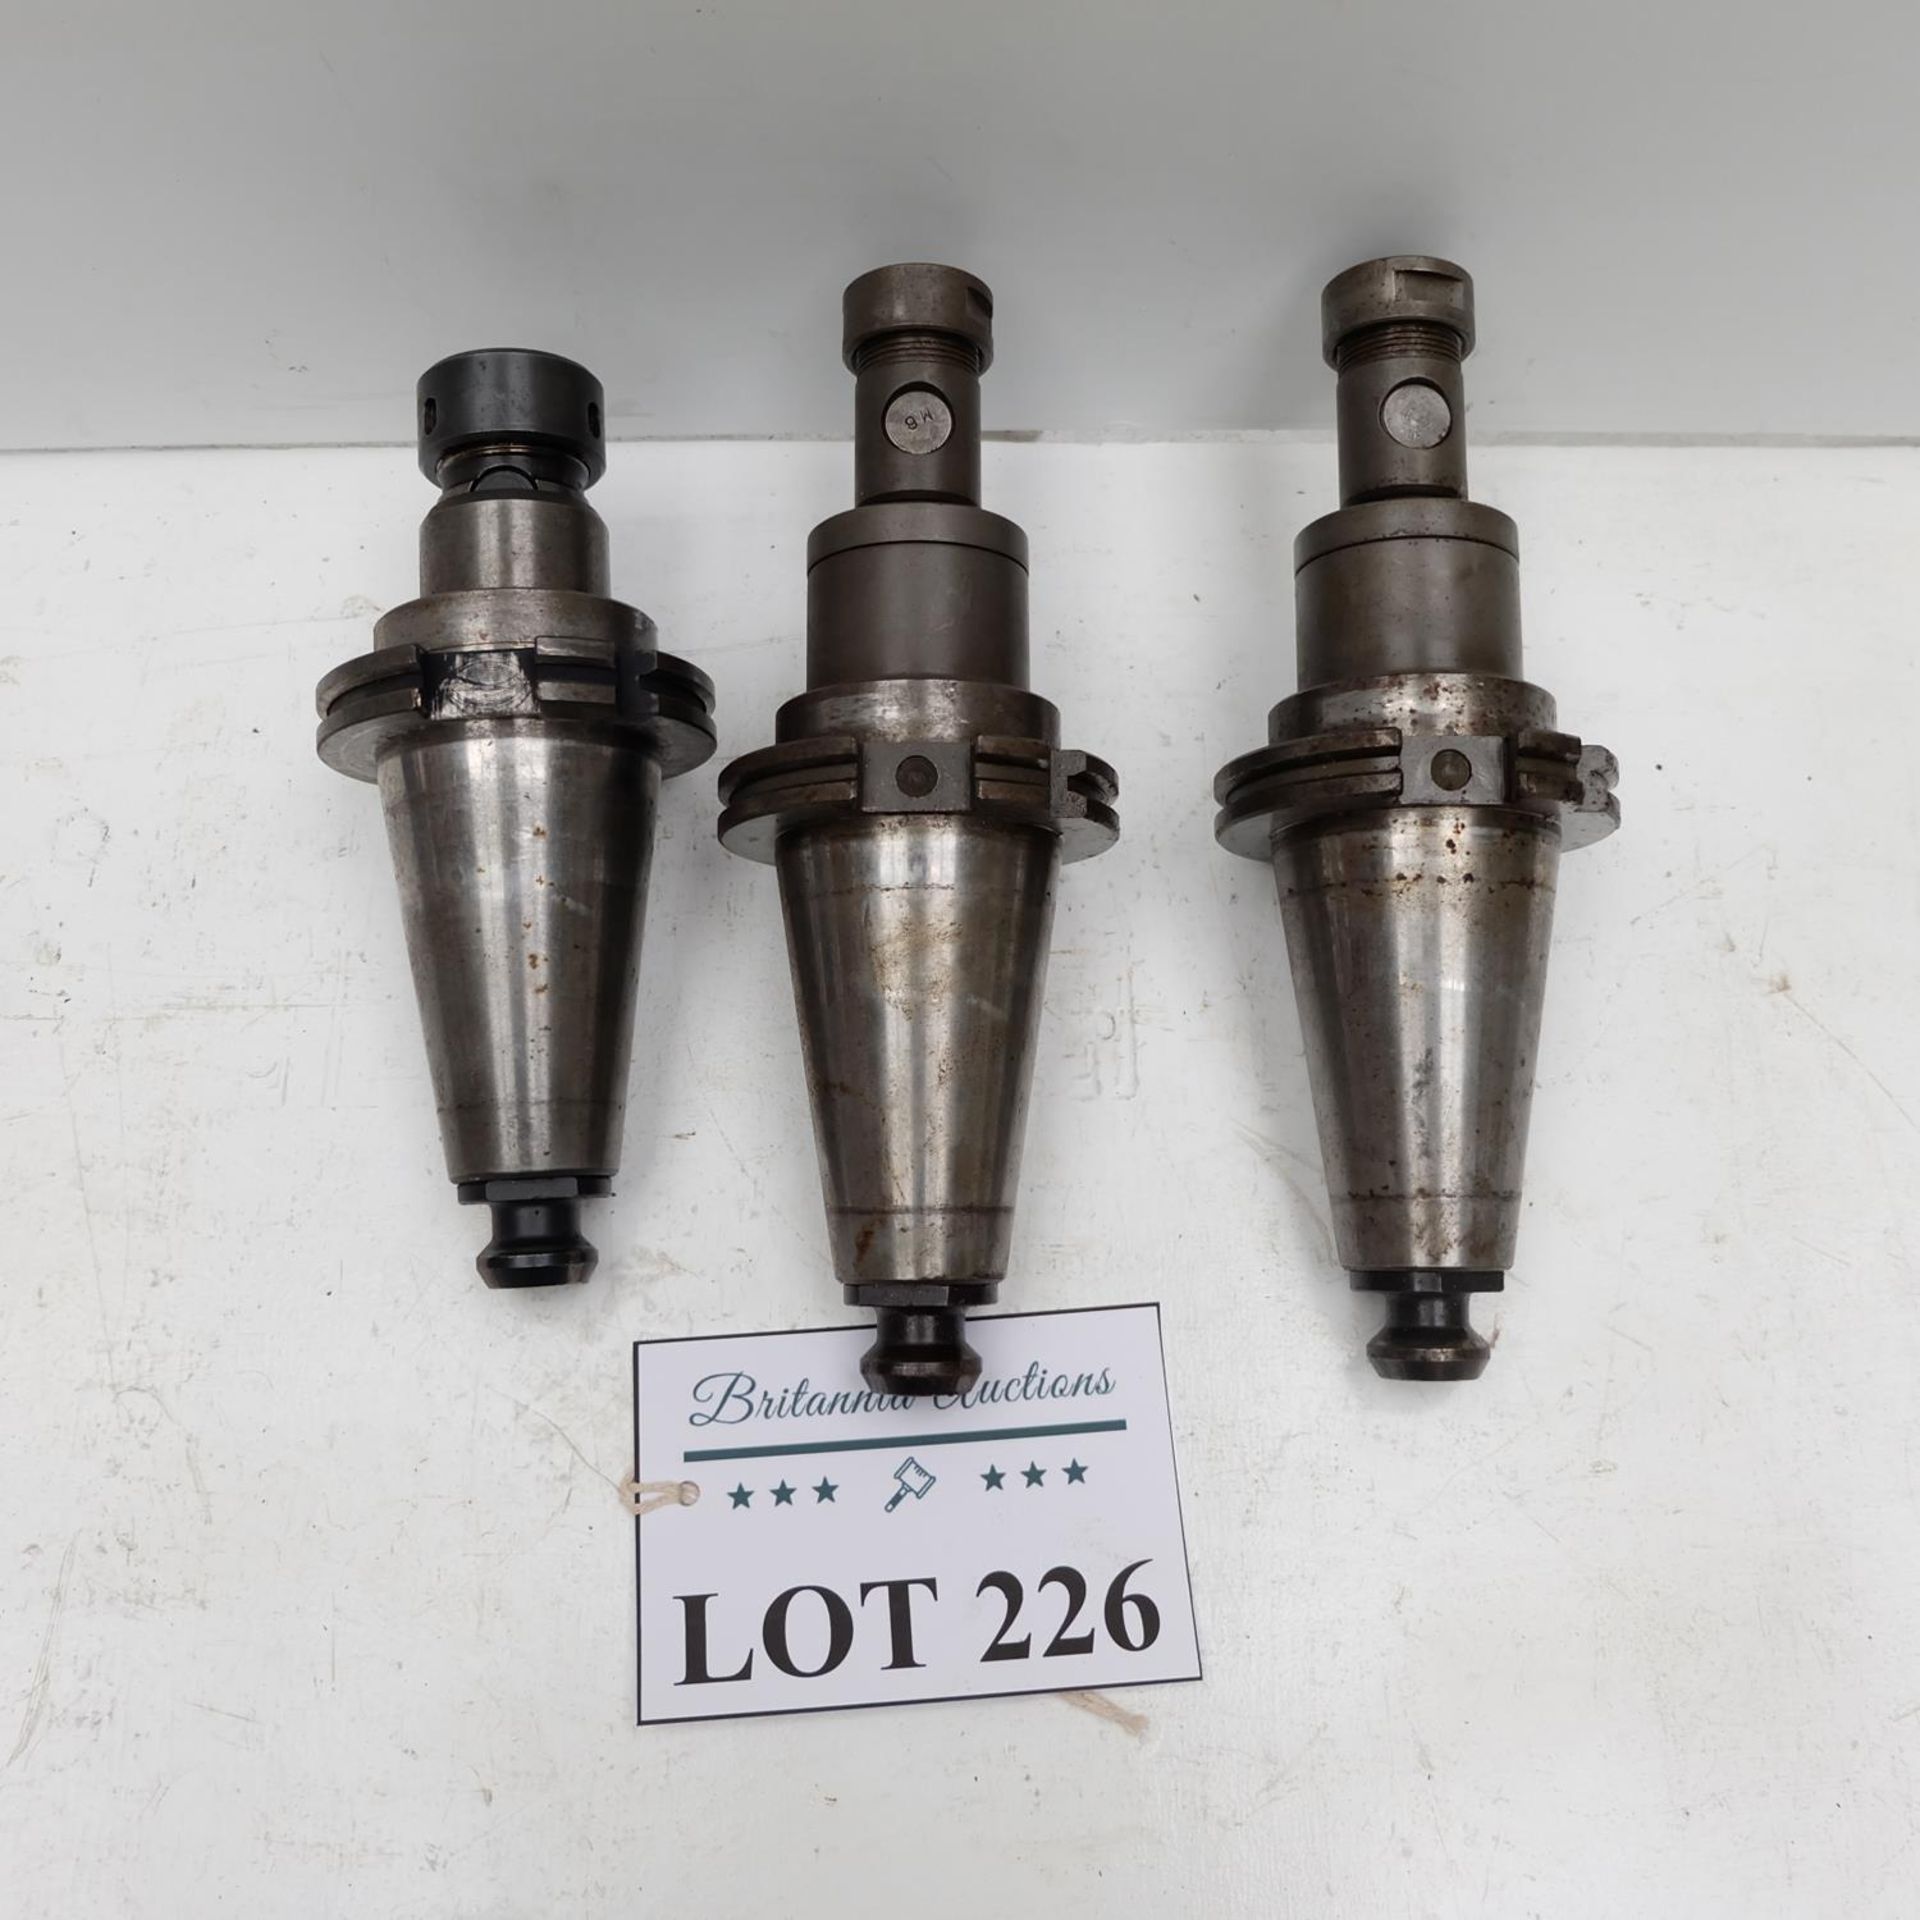 Quantity of 3 x SK 50 Spindle Tooling.